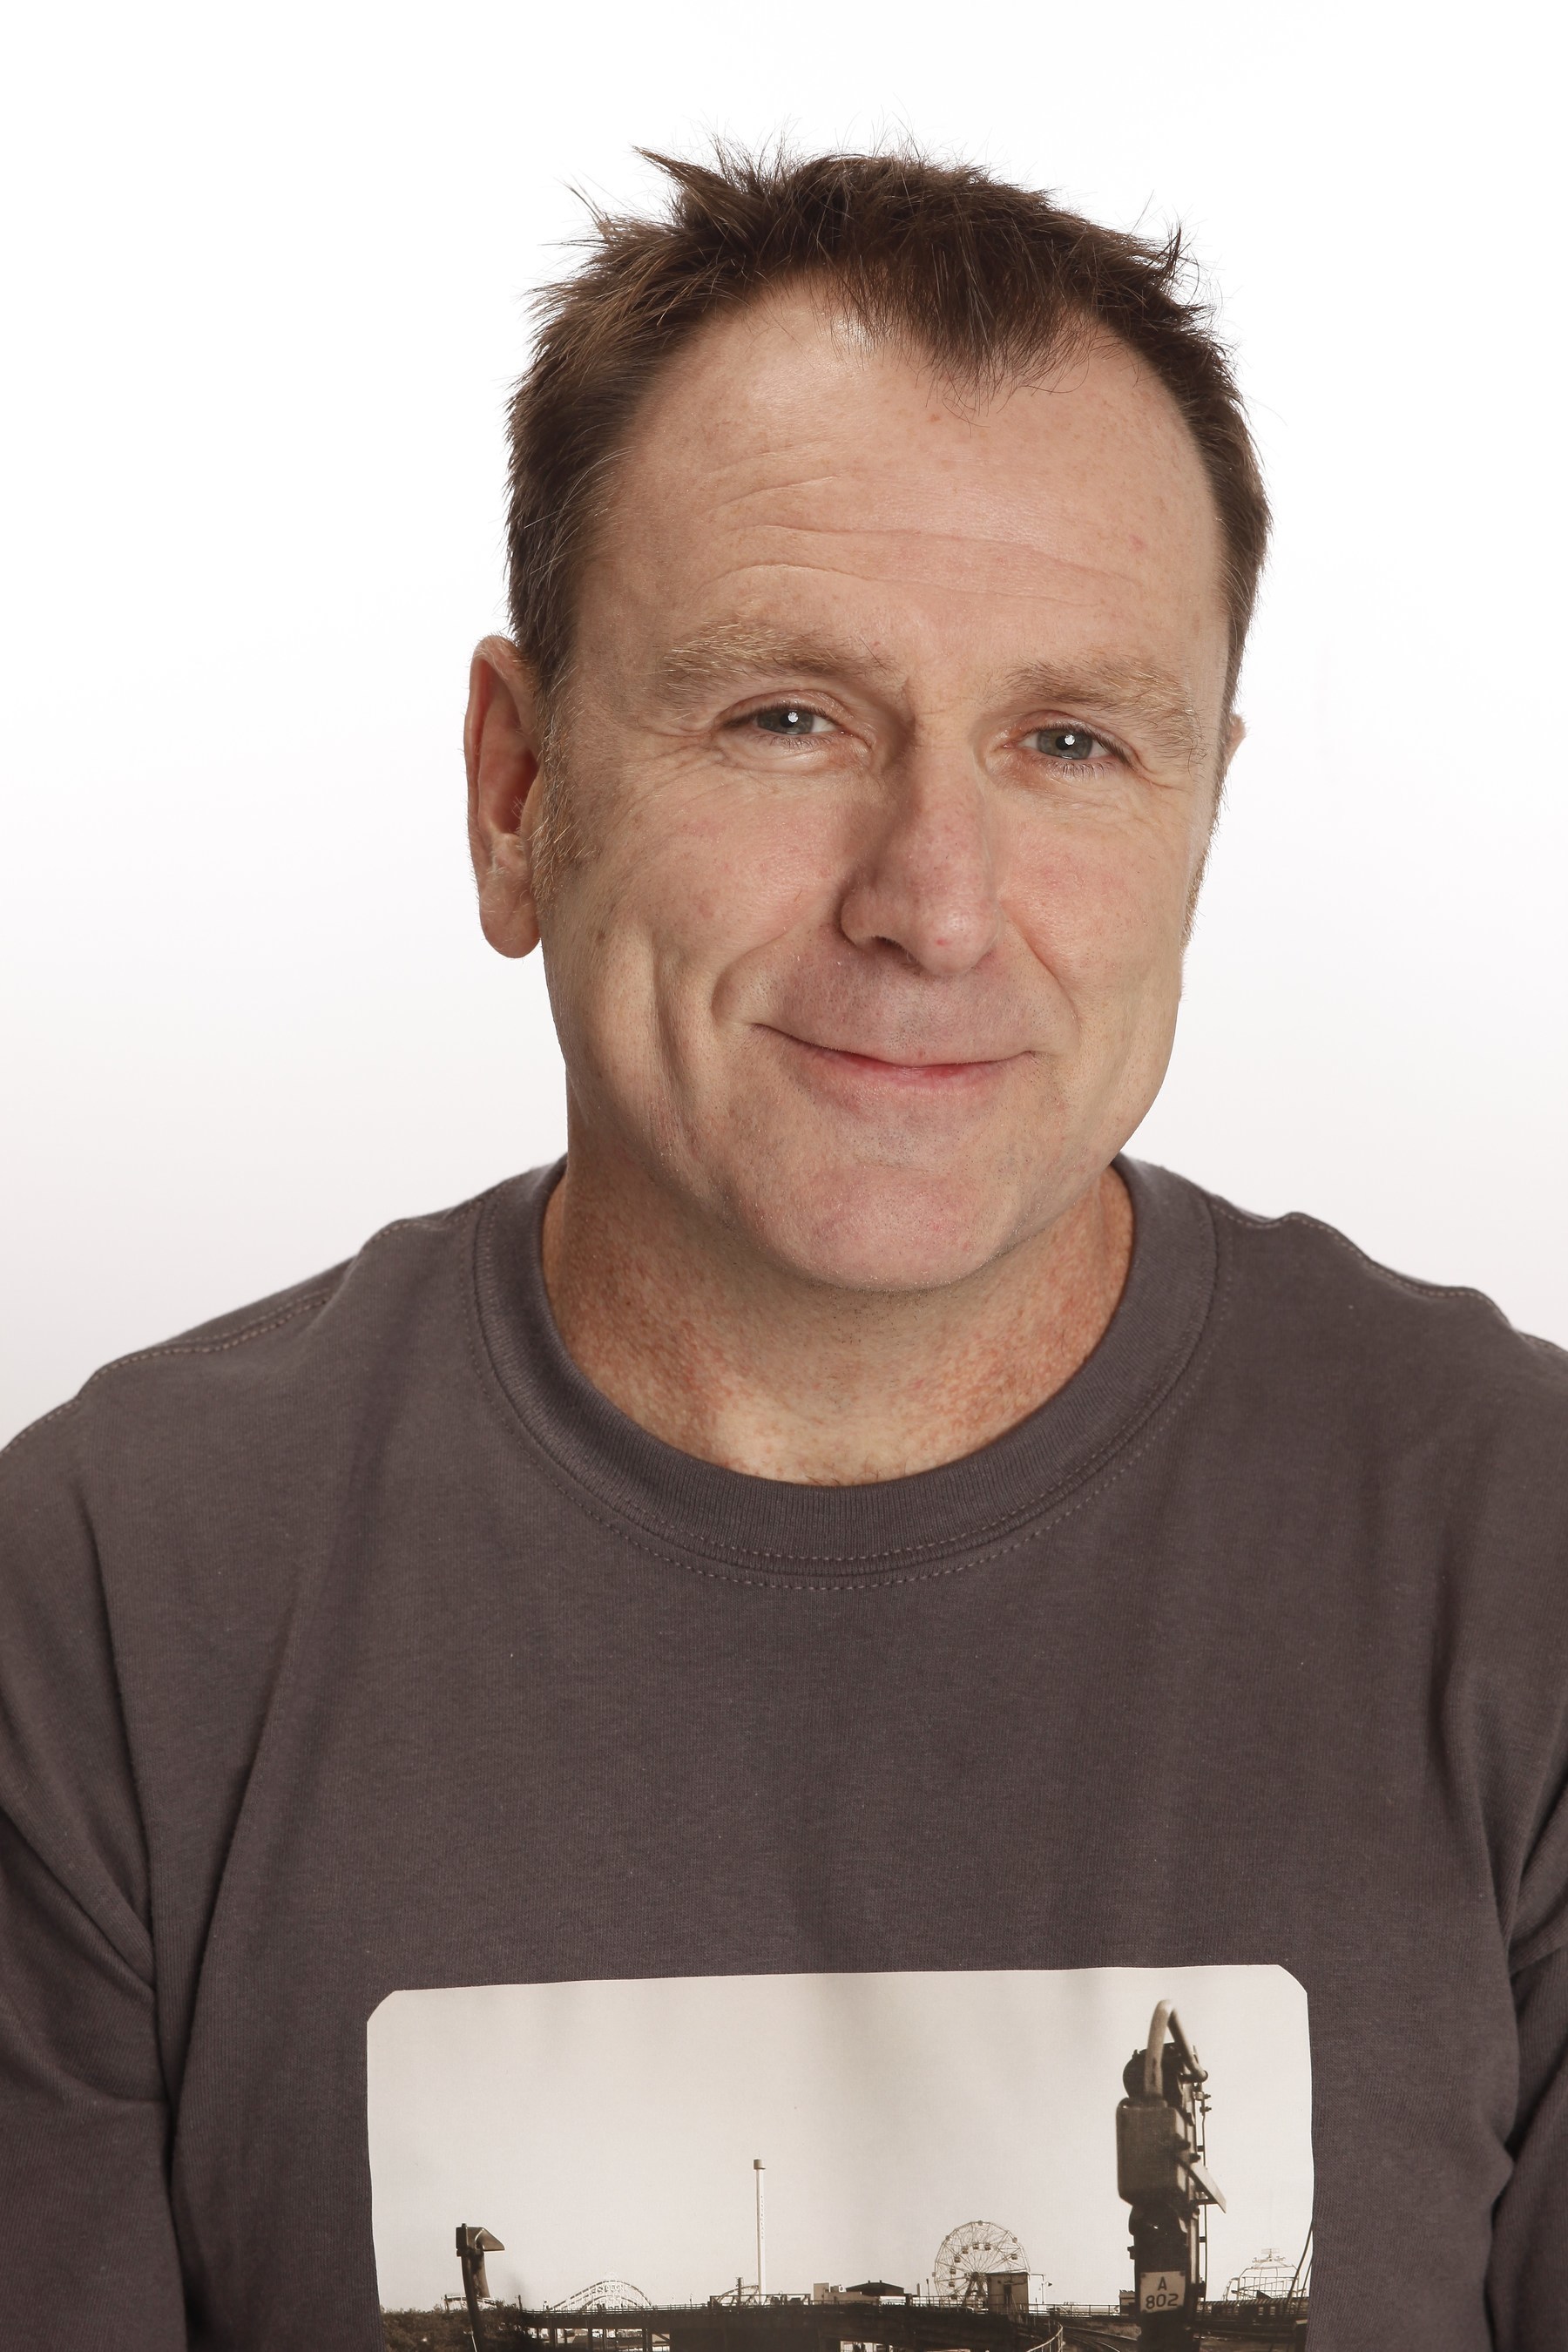 Comedian and former Saturday Night Live cast member Colin Quinn will perform at the R Baby Foundation's Stand Up and Celebrate Gala on November 30 at The Plaza Hotel in New York City. Tickets may be purchased at www.rbabyfoundation.org. The event benefits pediatric emergency healthcare programs.